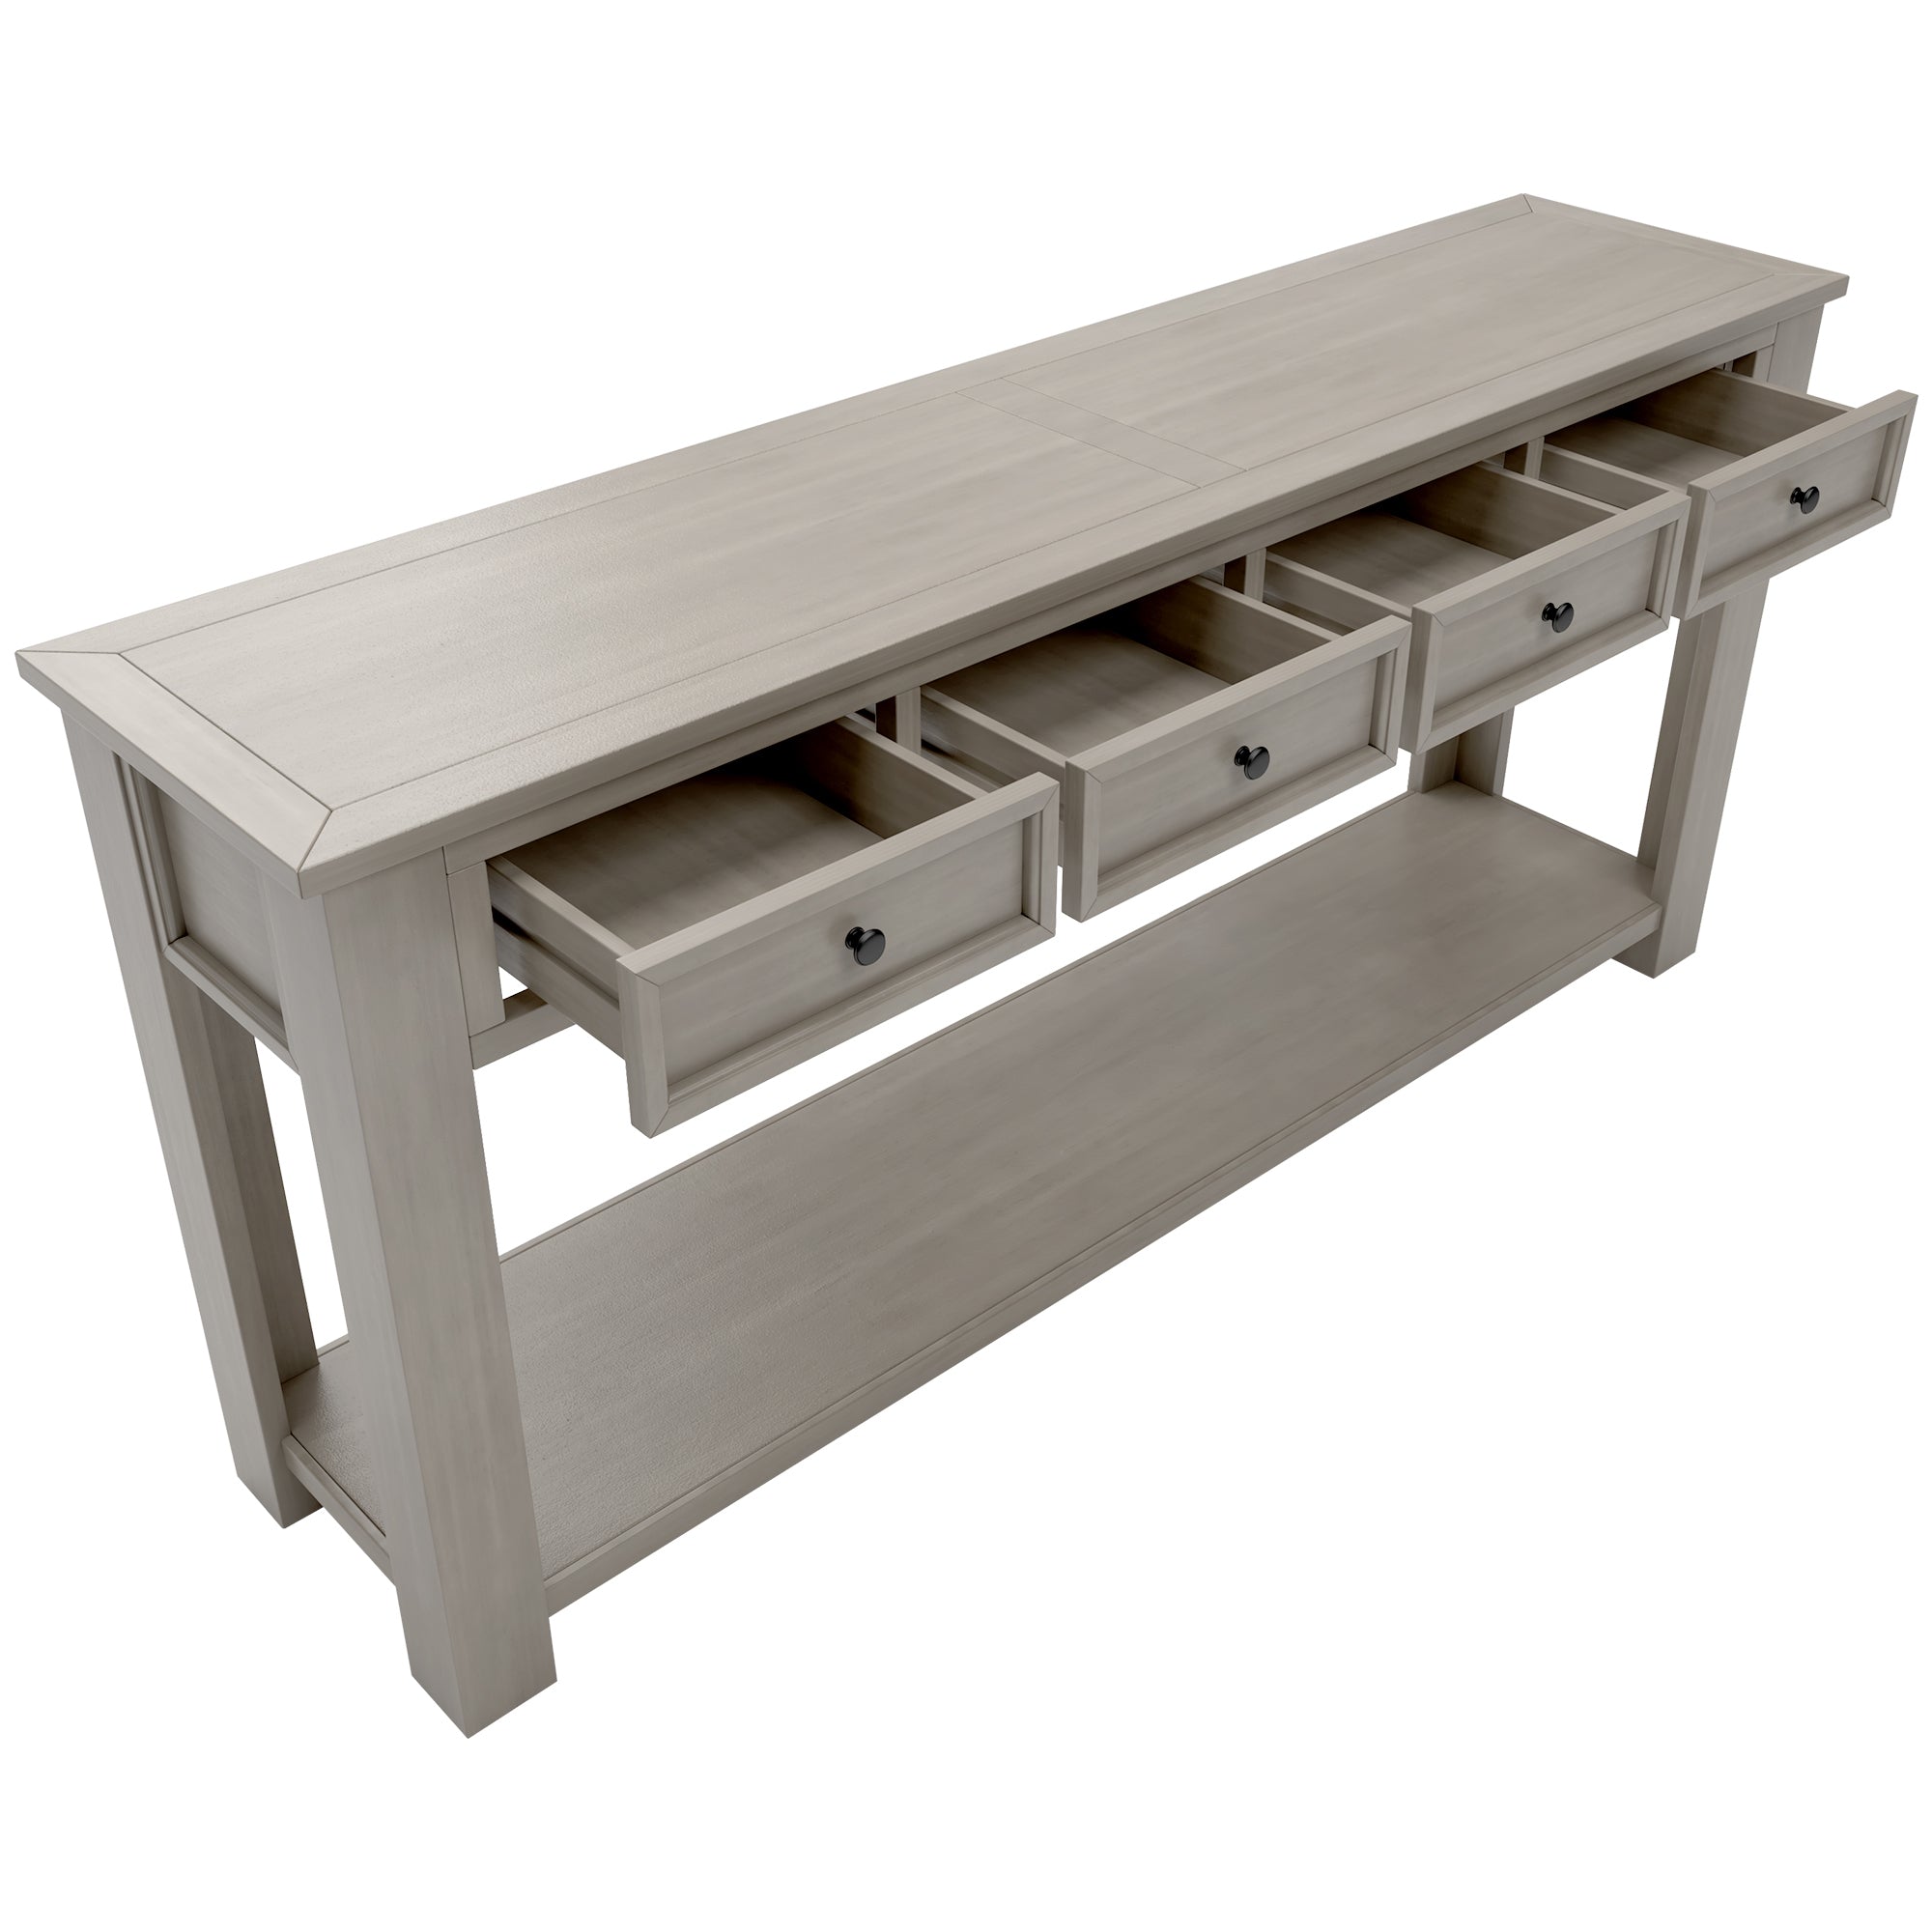 Console table with storage space